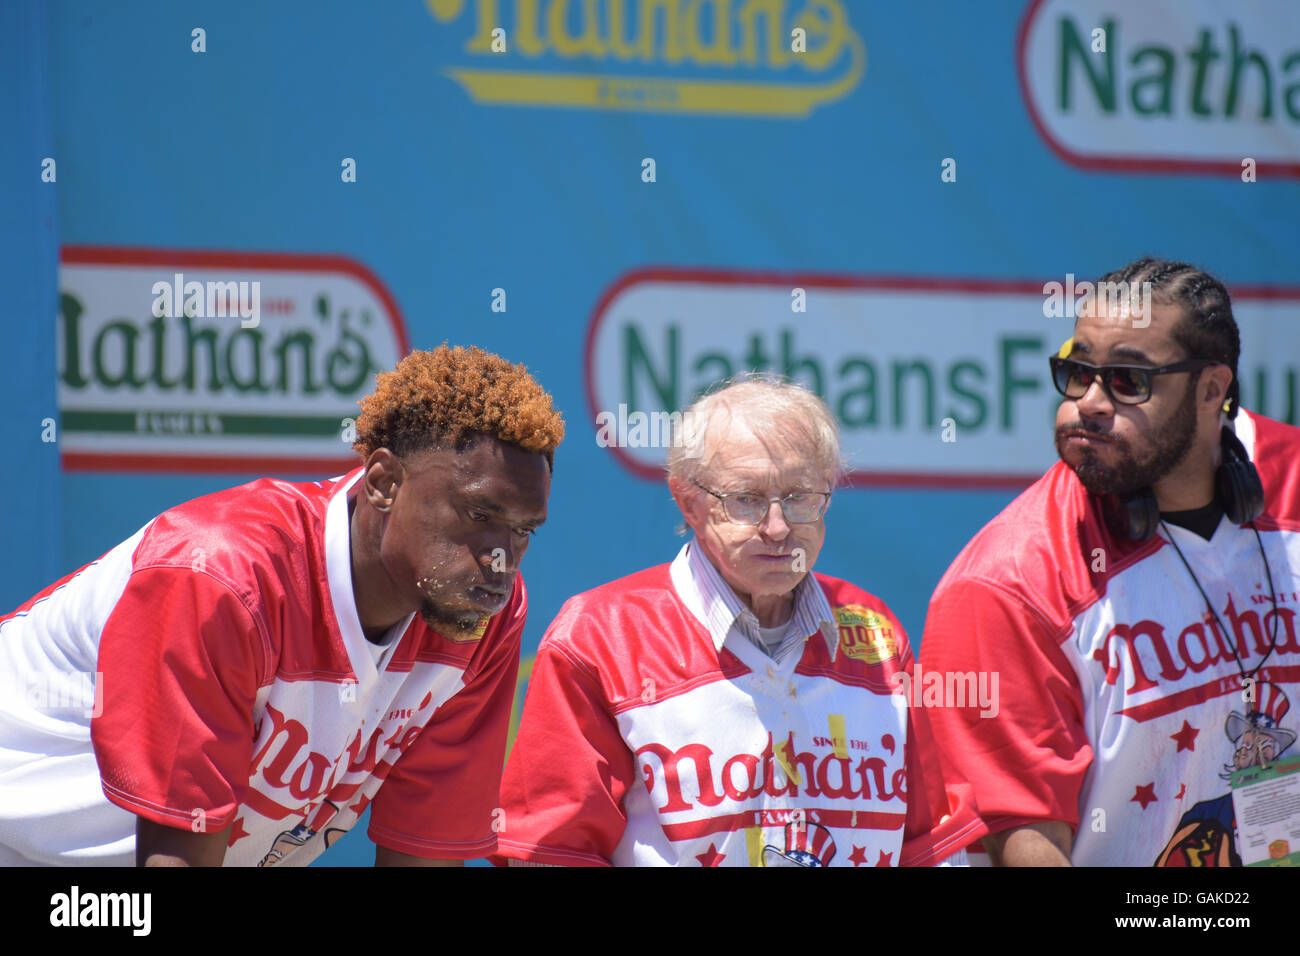 New York City, United States. 04th July, 2016. Seventy-two year old contestant Rich 'The Locust' LeFevre competes surrounded by Juan Rodriguez & Erik 'The Red' Denmark. Eight time Nathan's Famous Fourth of July Hot Dog eating contest winner Joey Chestnut regained the crown he lost last year to Matt Stonie by defeating Stonie eating 70 hot dogs & buns during Nathan's Famous centennial contest in Coney Island. Credit:  Andy Katz/Pacific Press/Alamy Live News Stock Photo